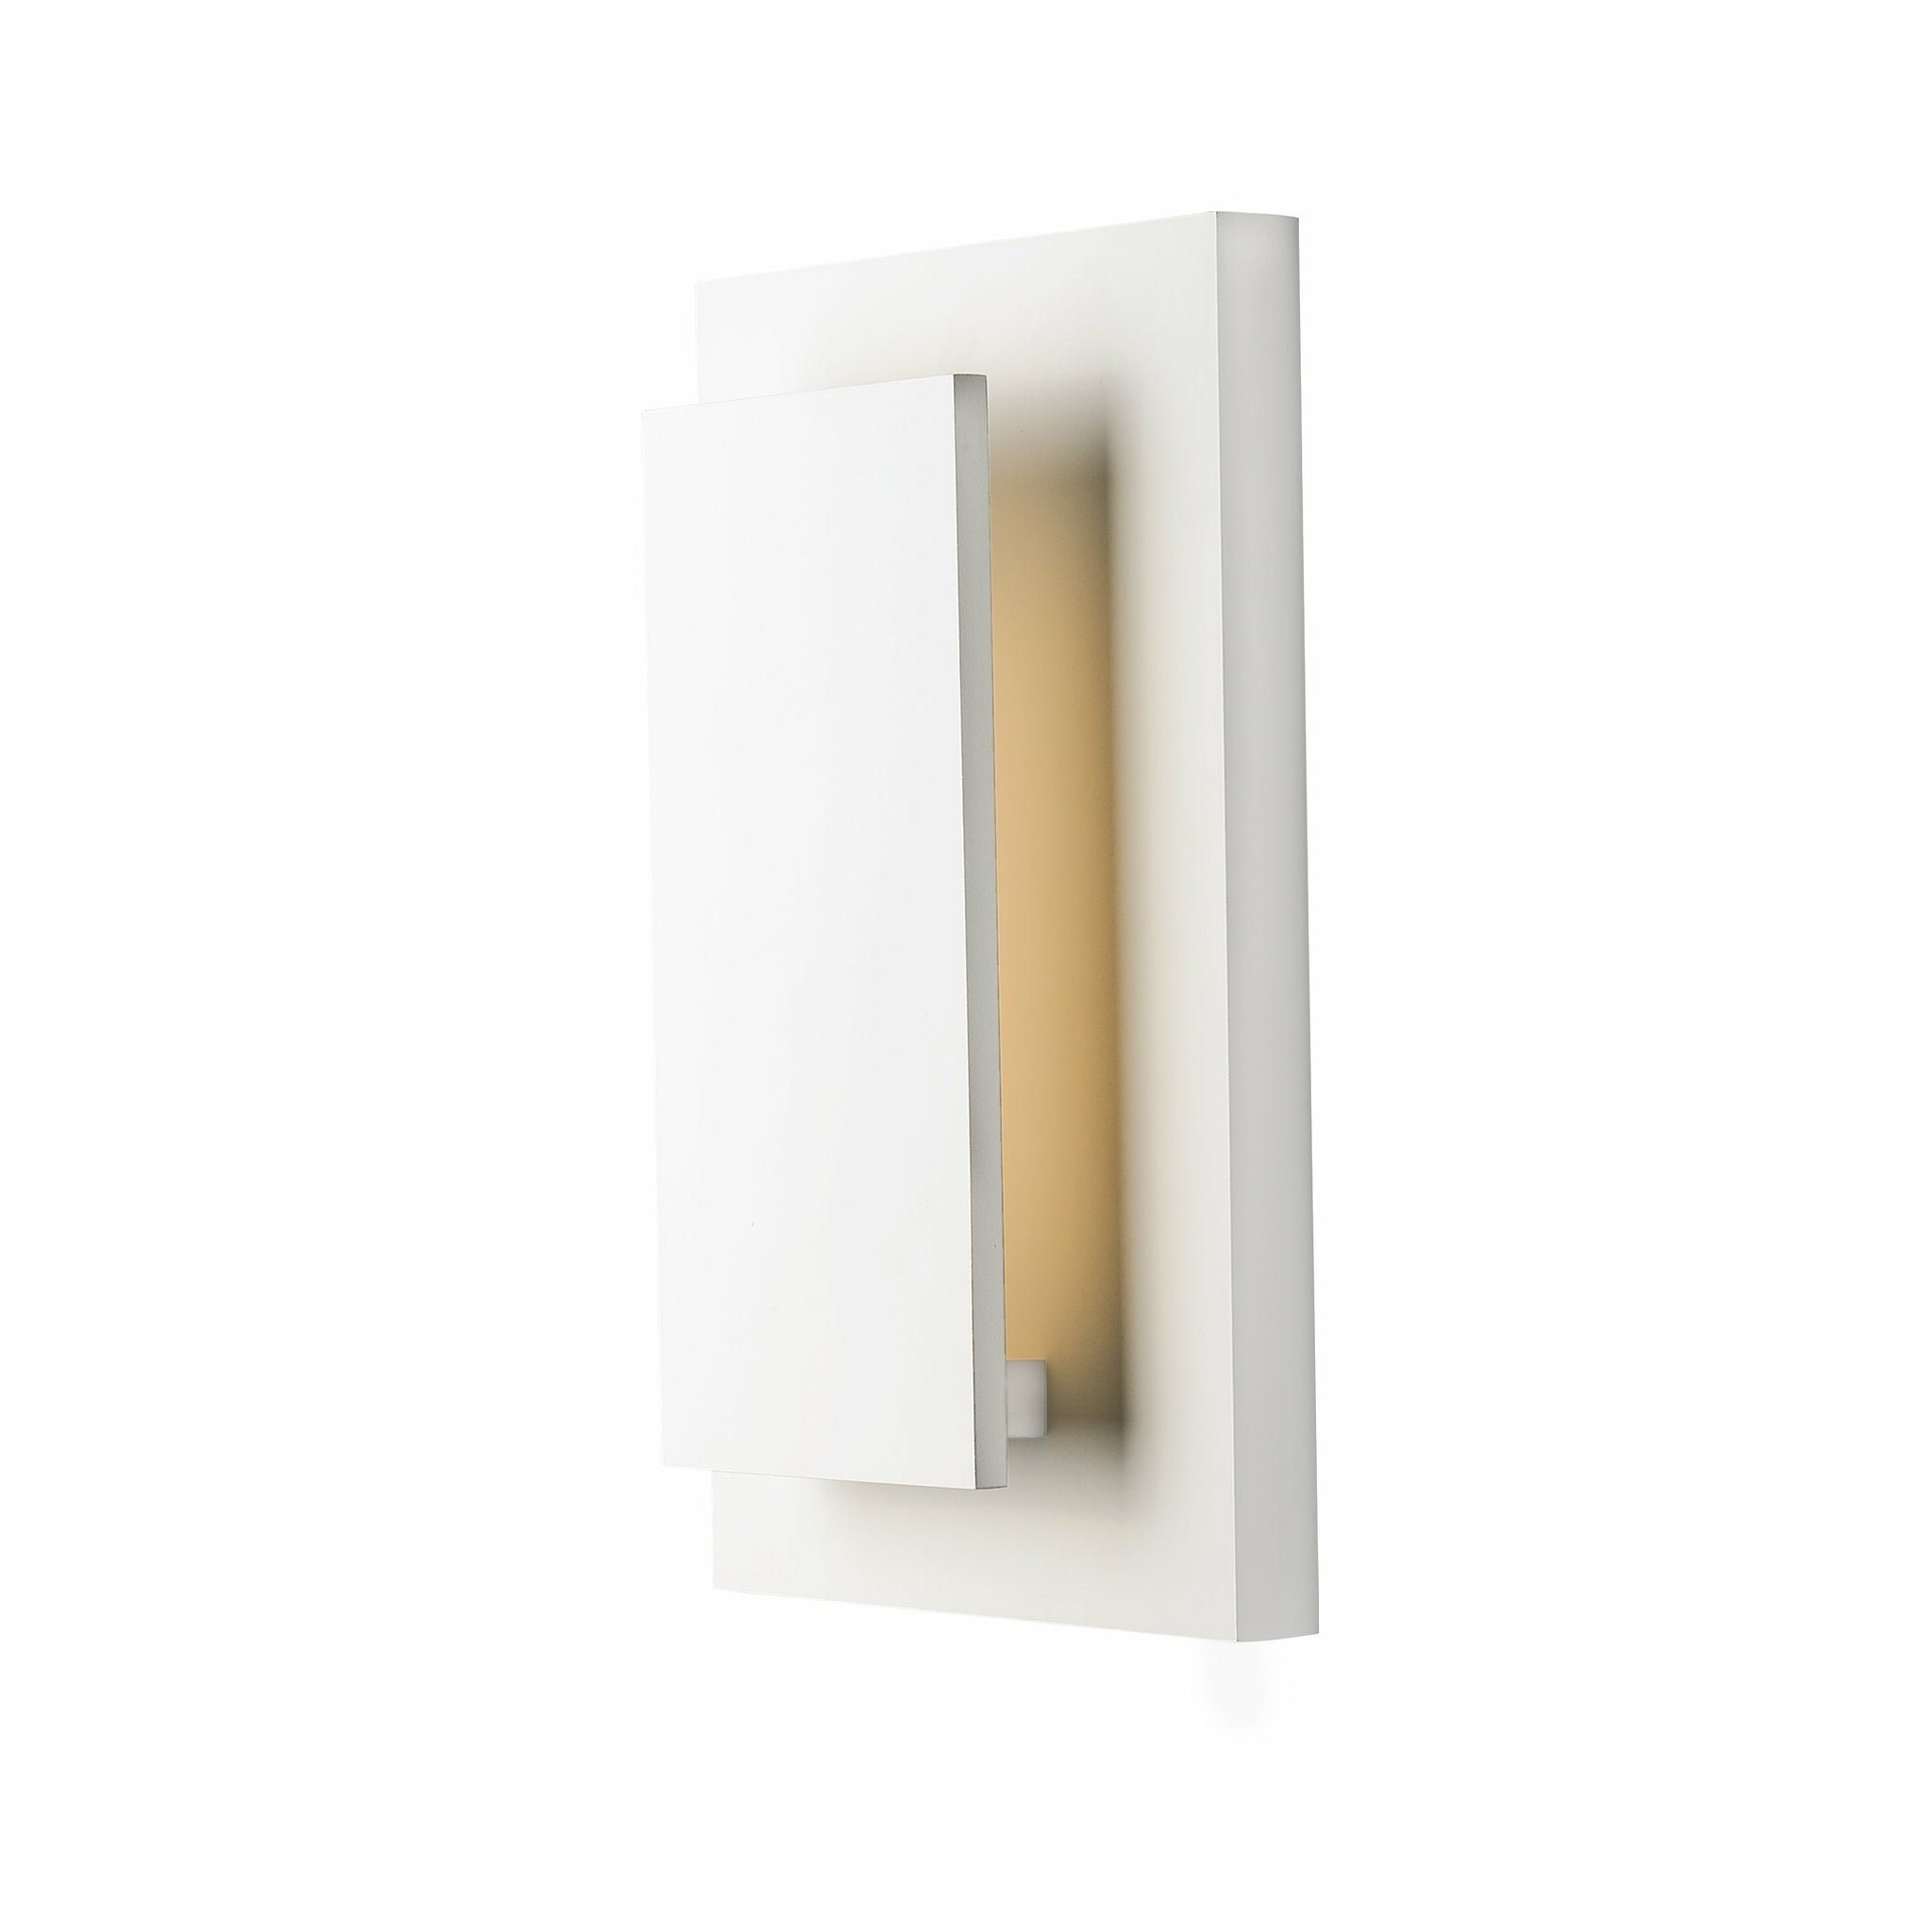 Alumilux Piso Outdoor Wall Light White